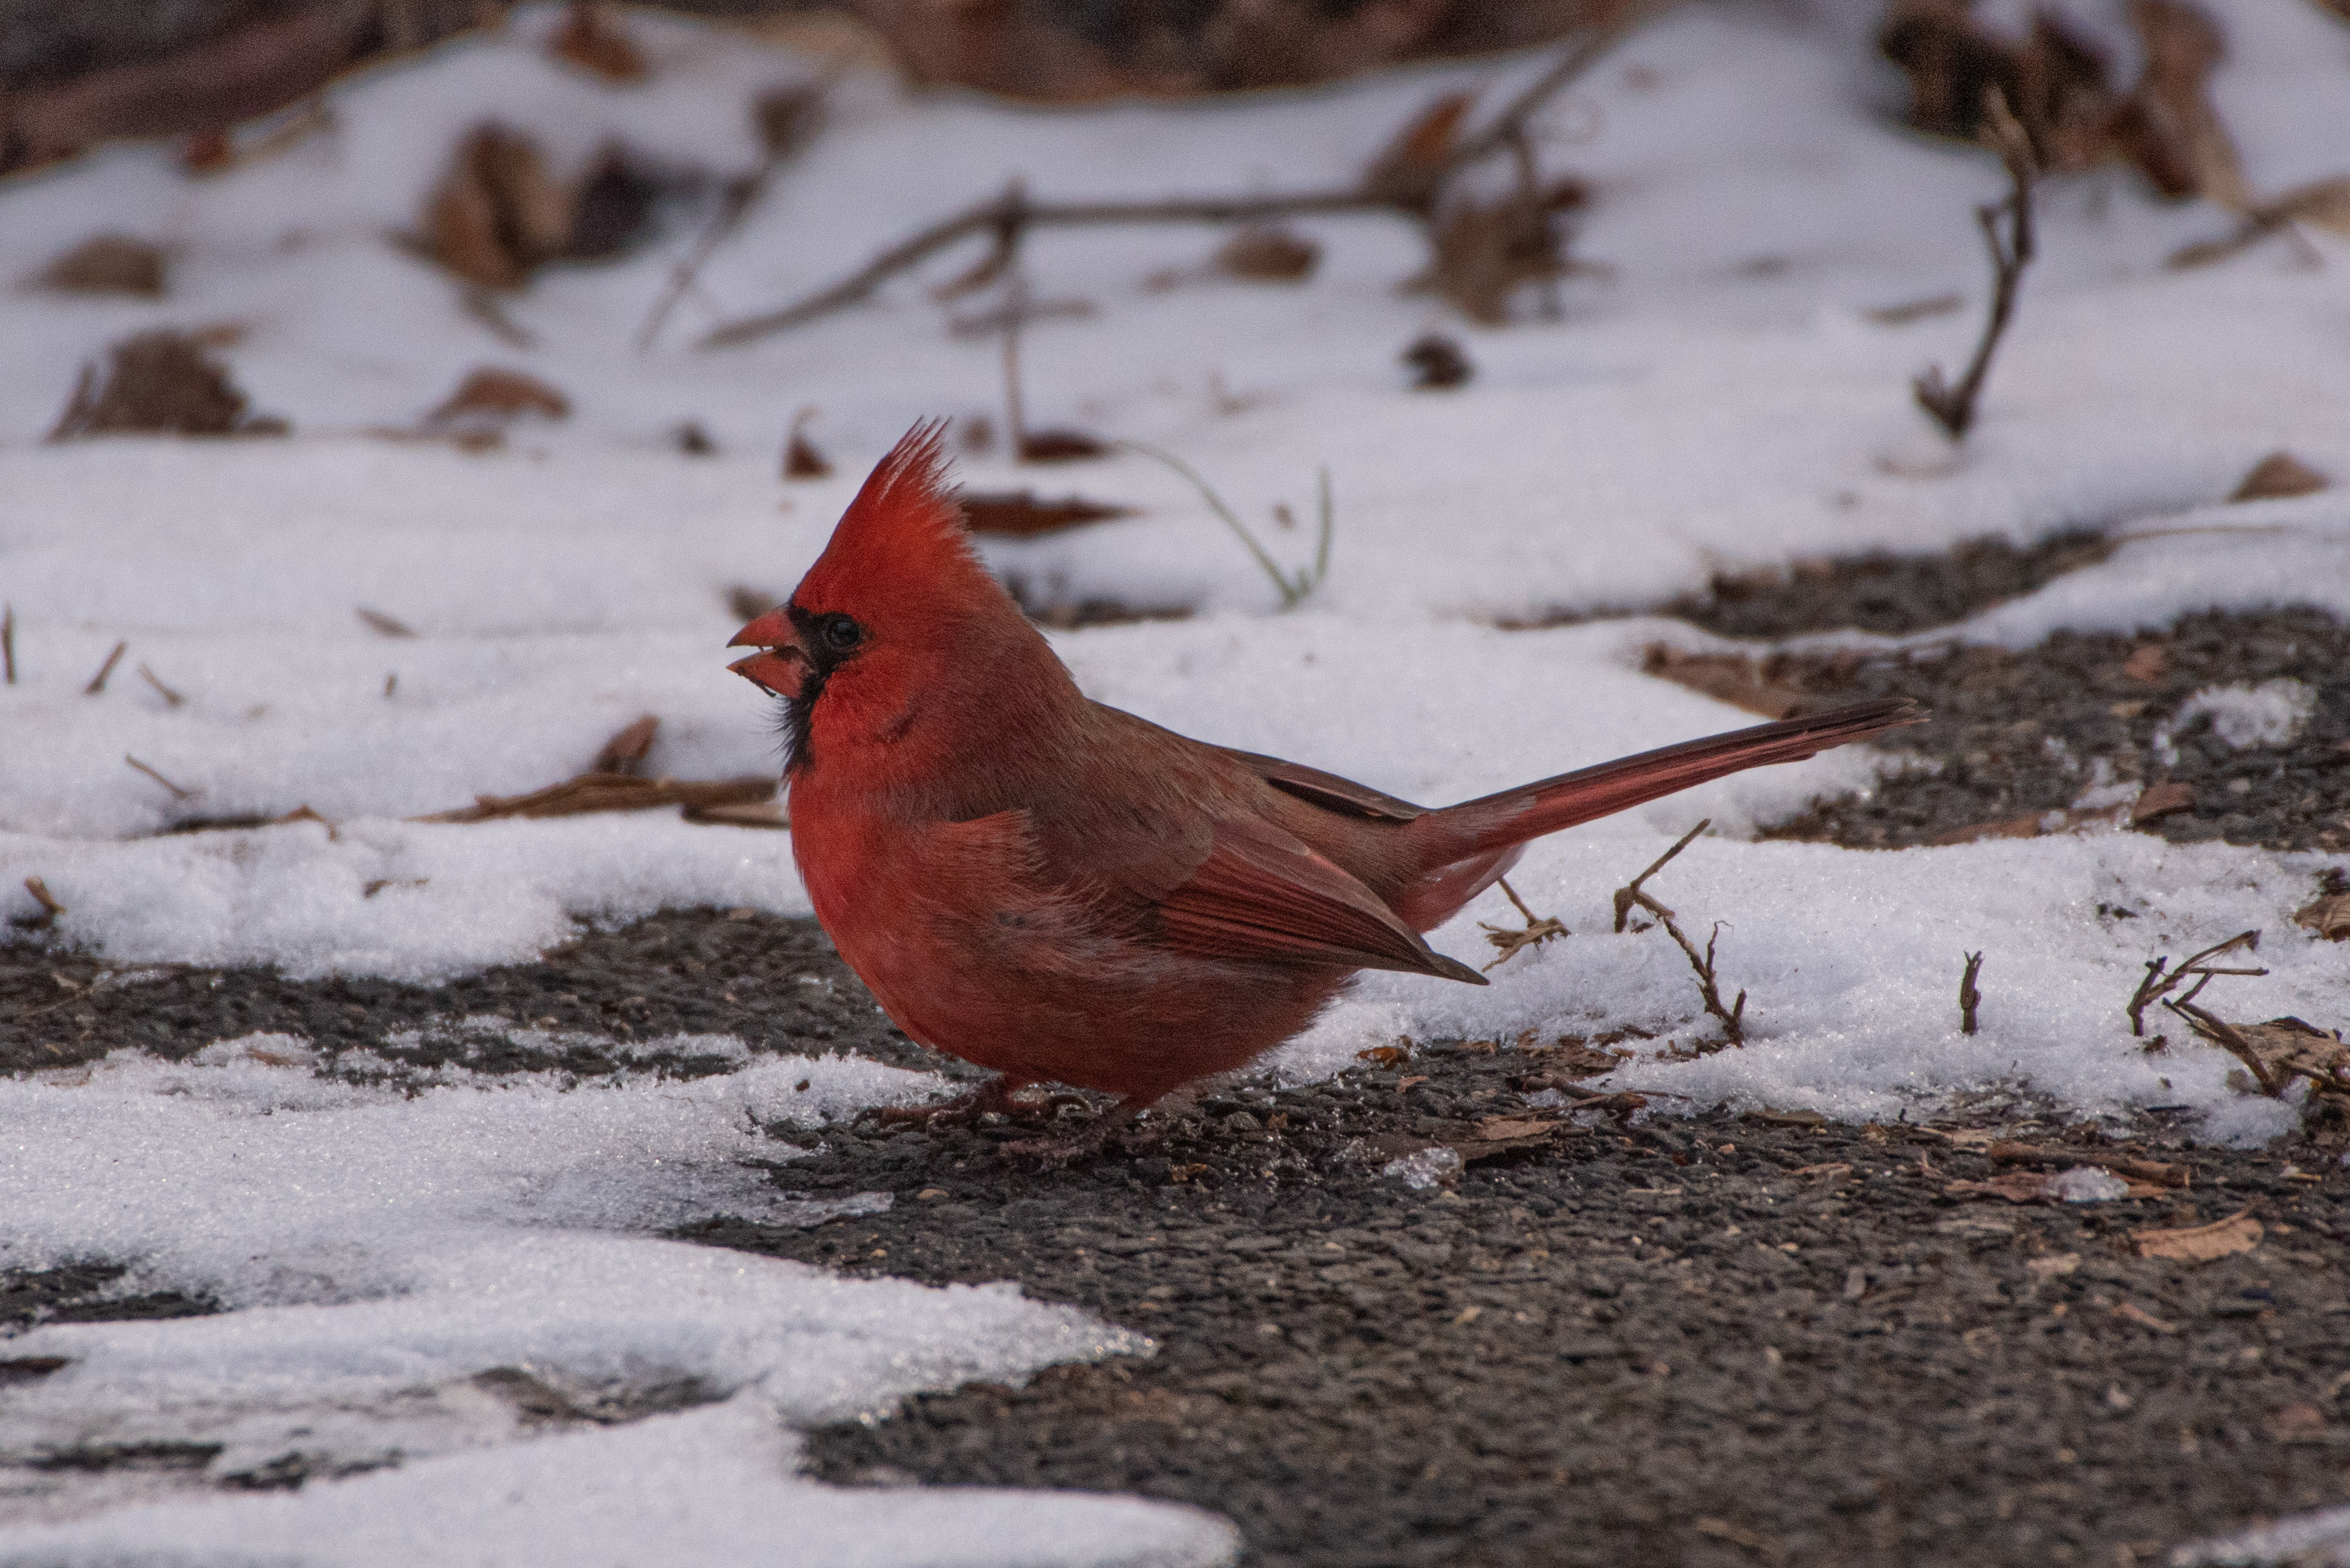 What type of seeds do cardinals prefer?